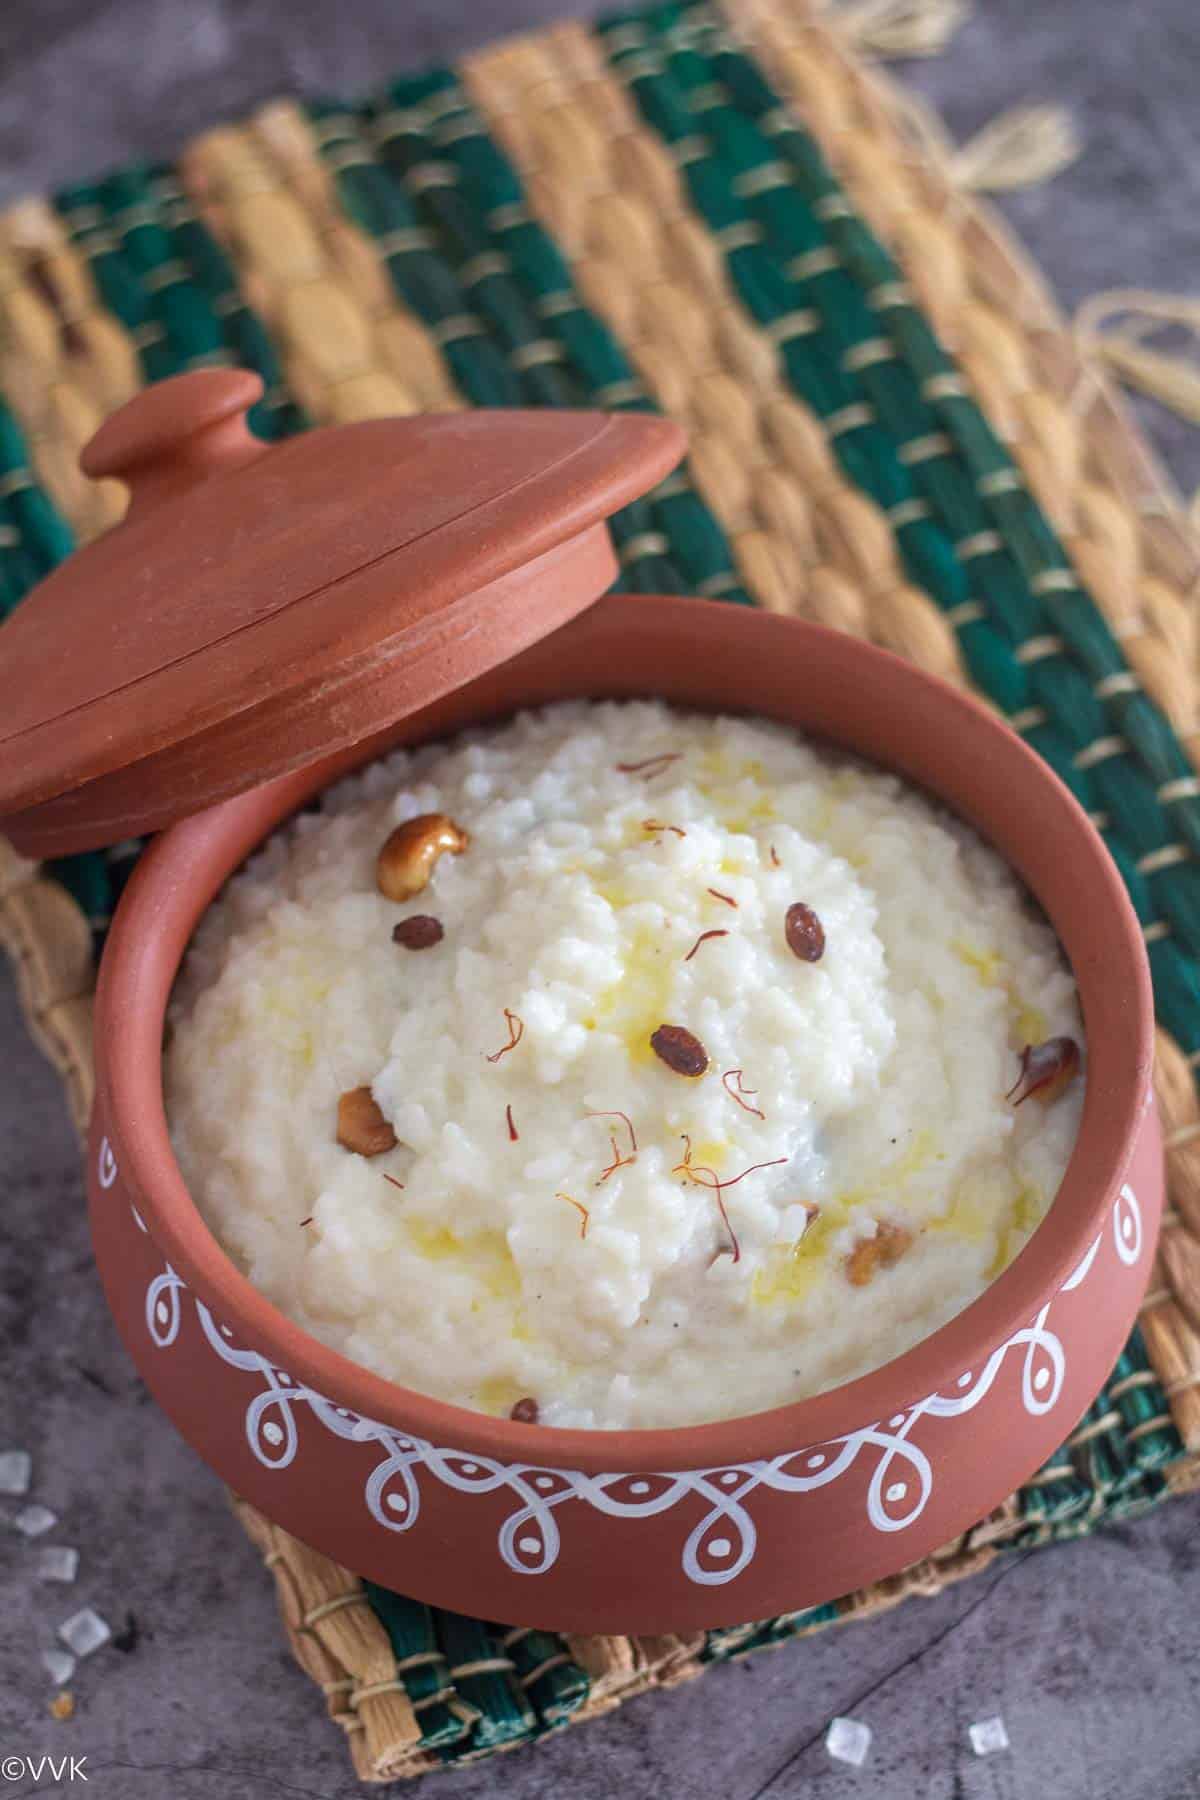 close up show of sugar candy rice served in clay pot placed on a mat